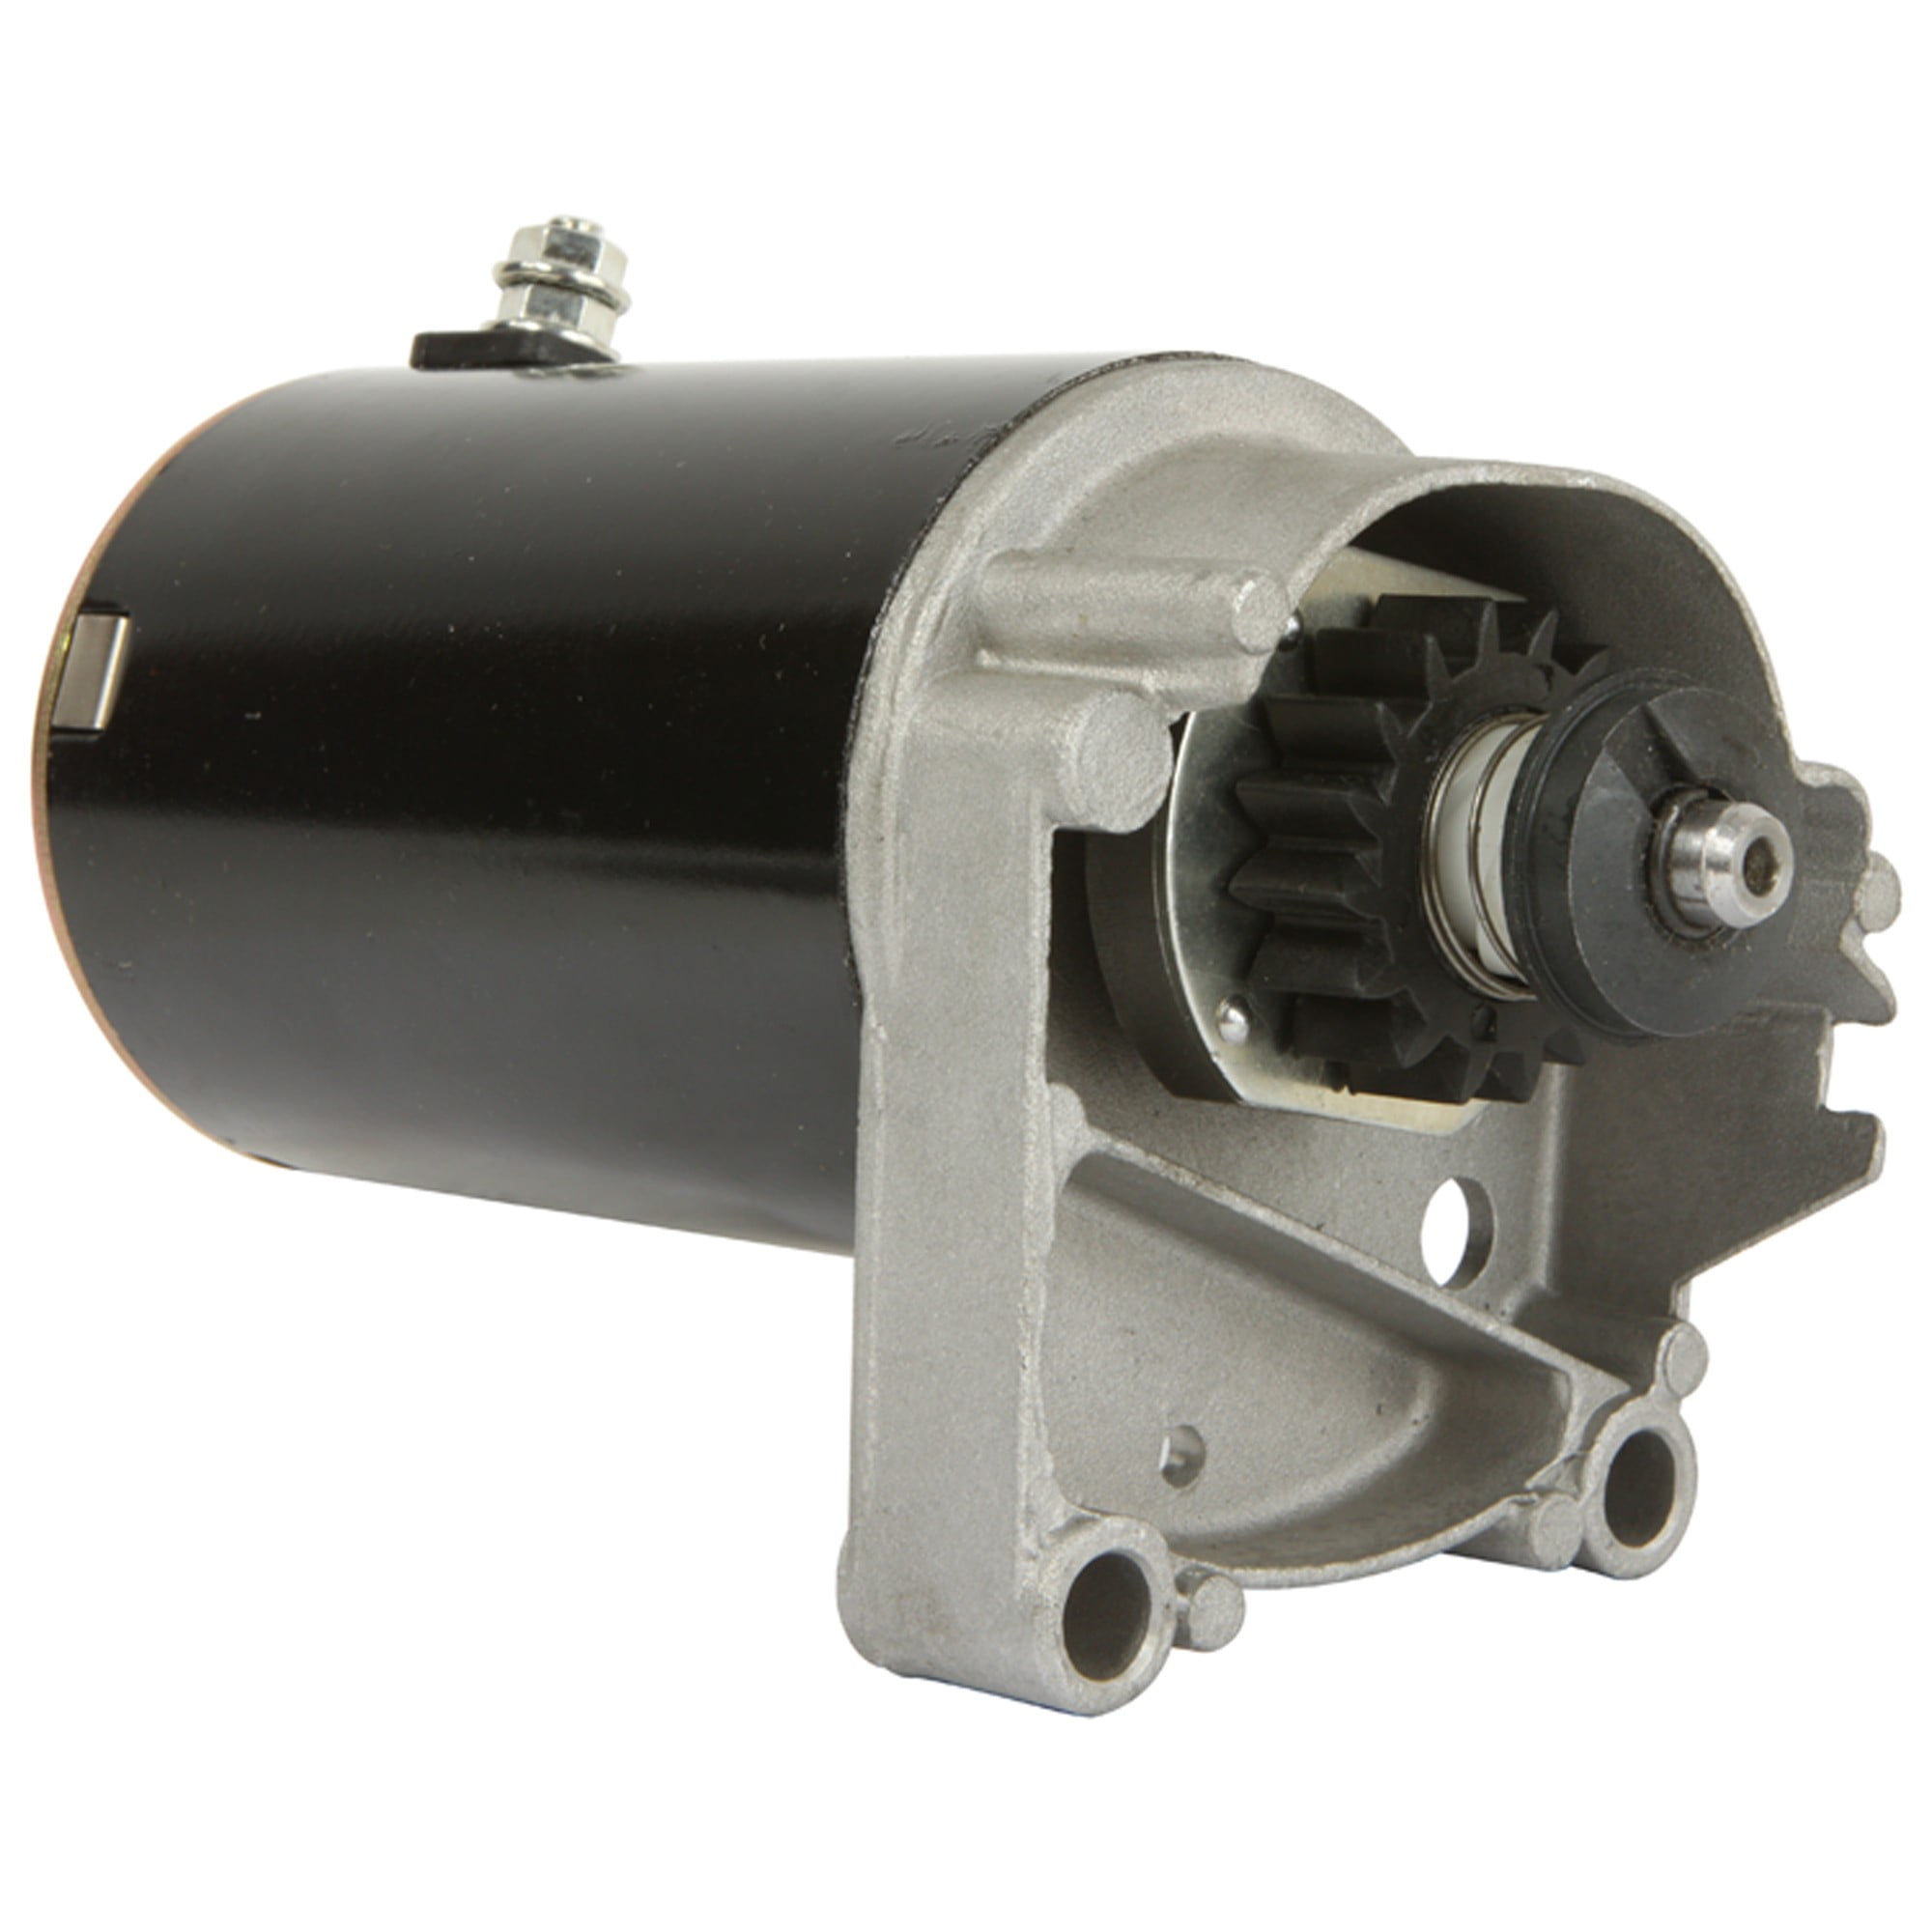 LESTER 5744 Starter Motor for Briggs & Stratton 14HP 16HP 18HP Engines 399928